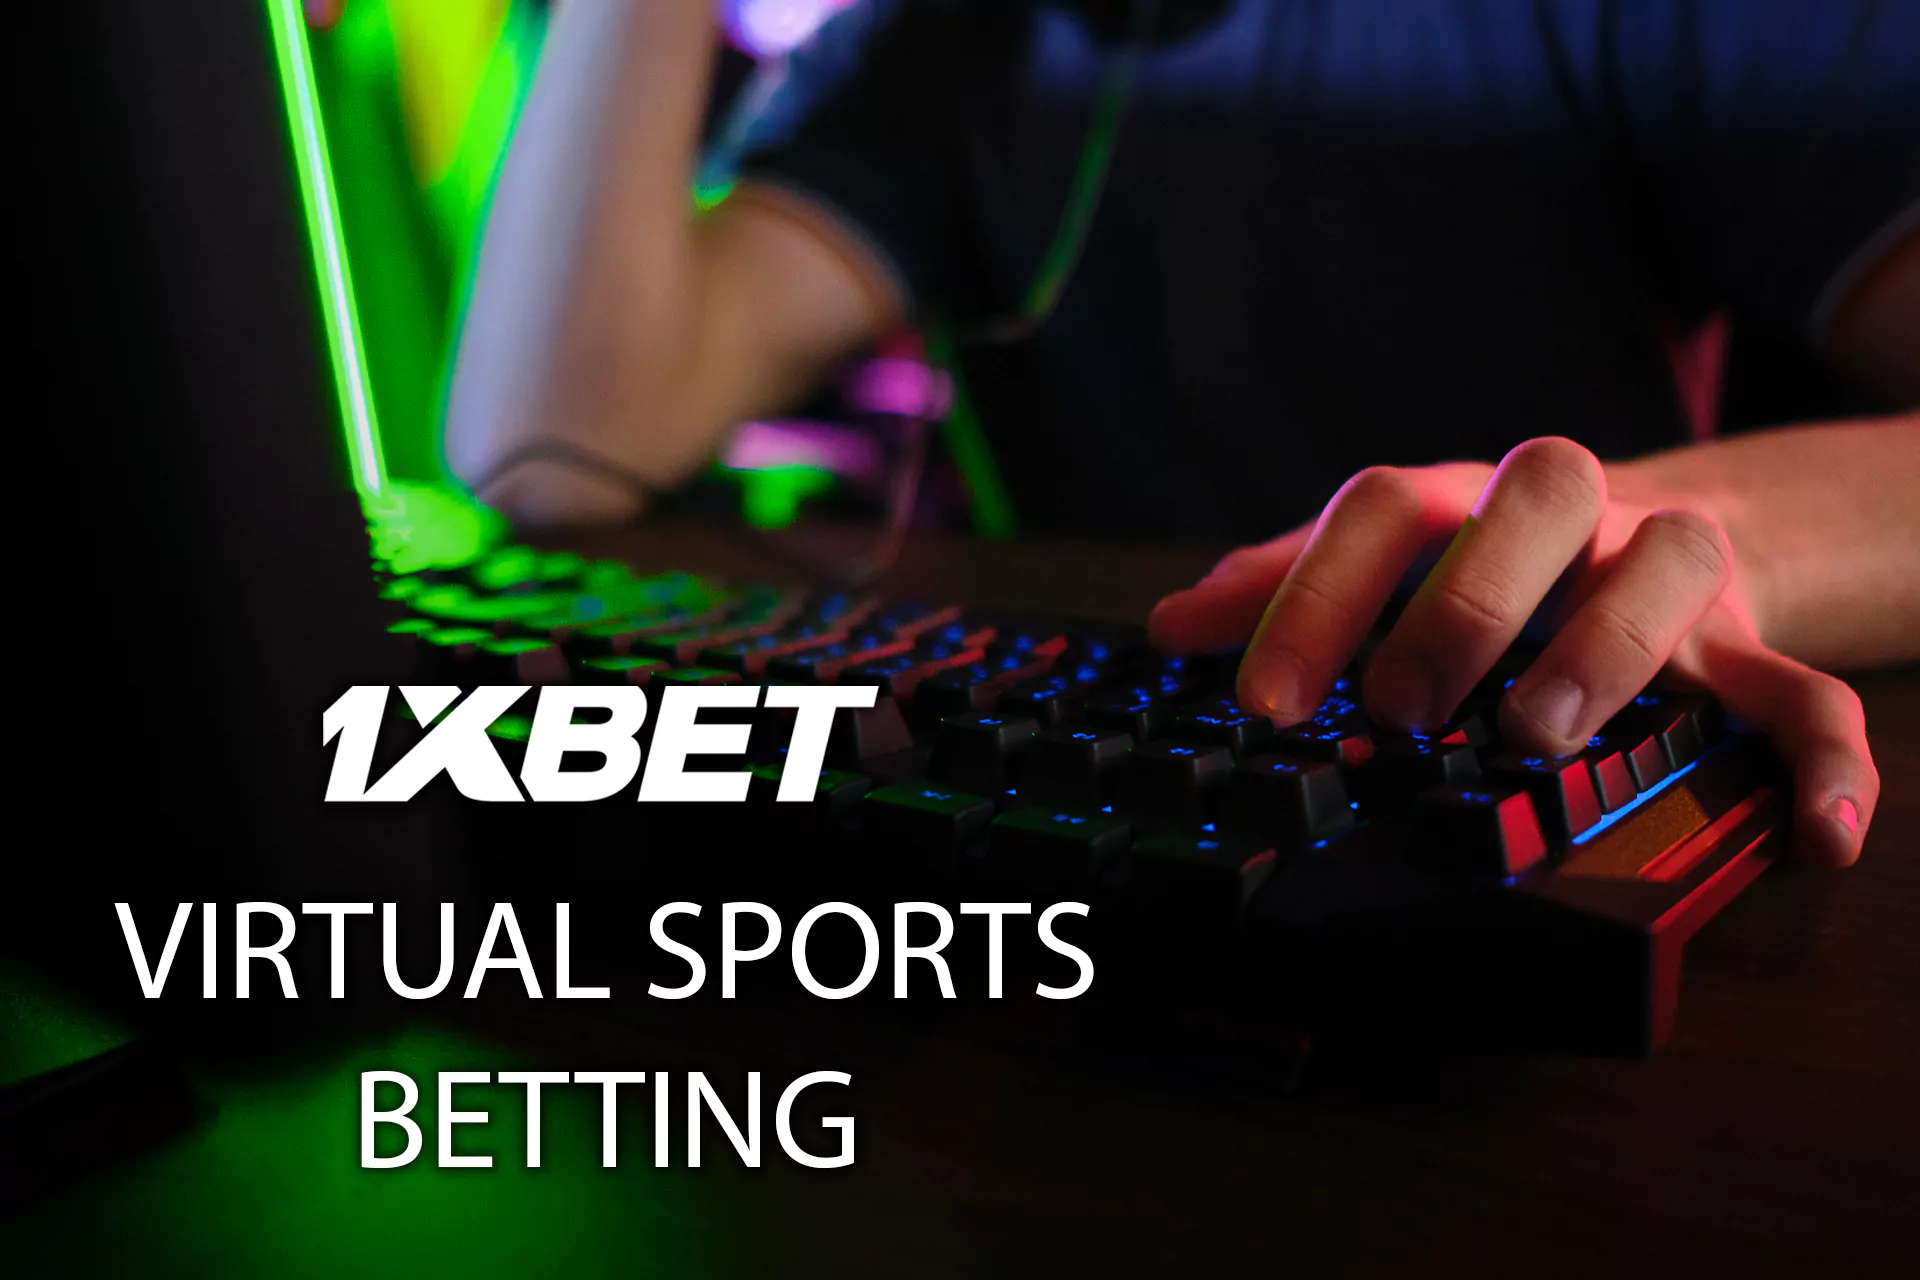 1xBet in India supports virtual sports betting.